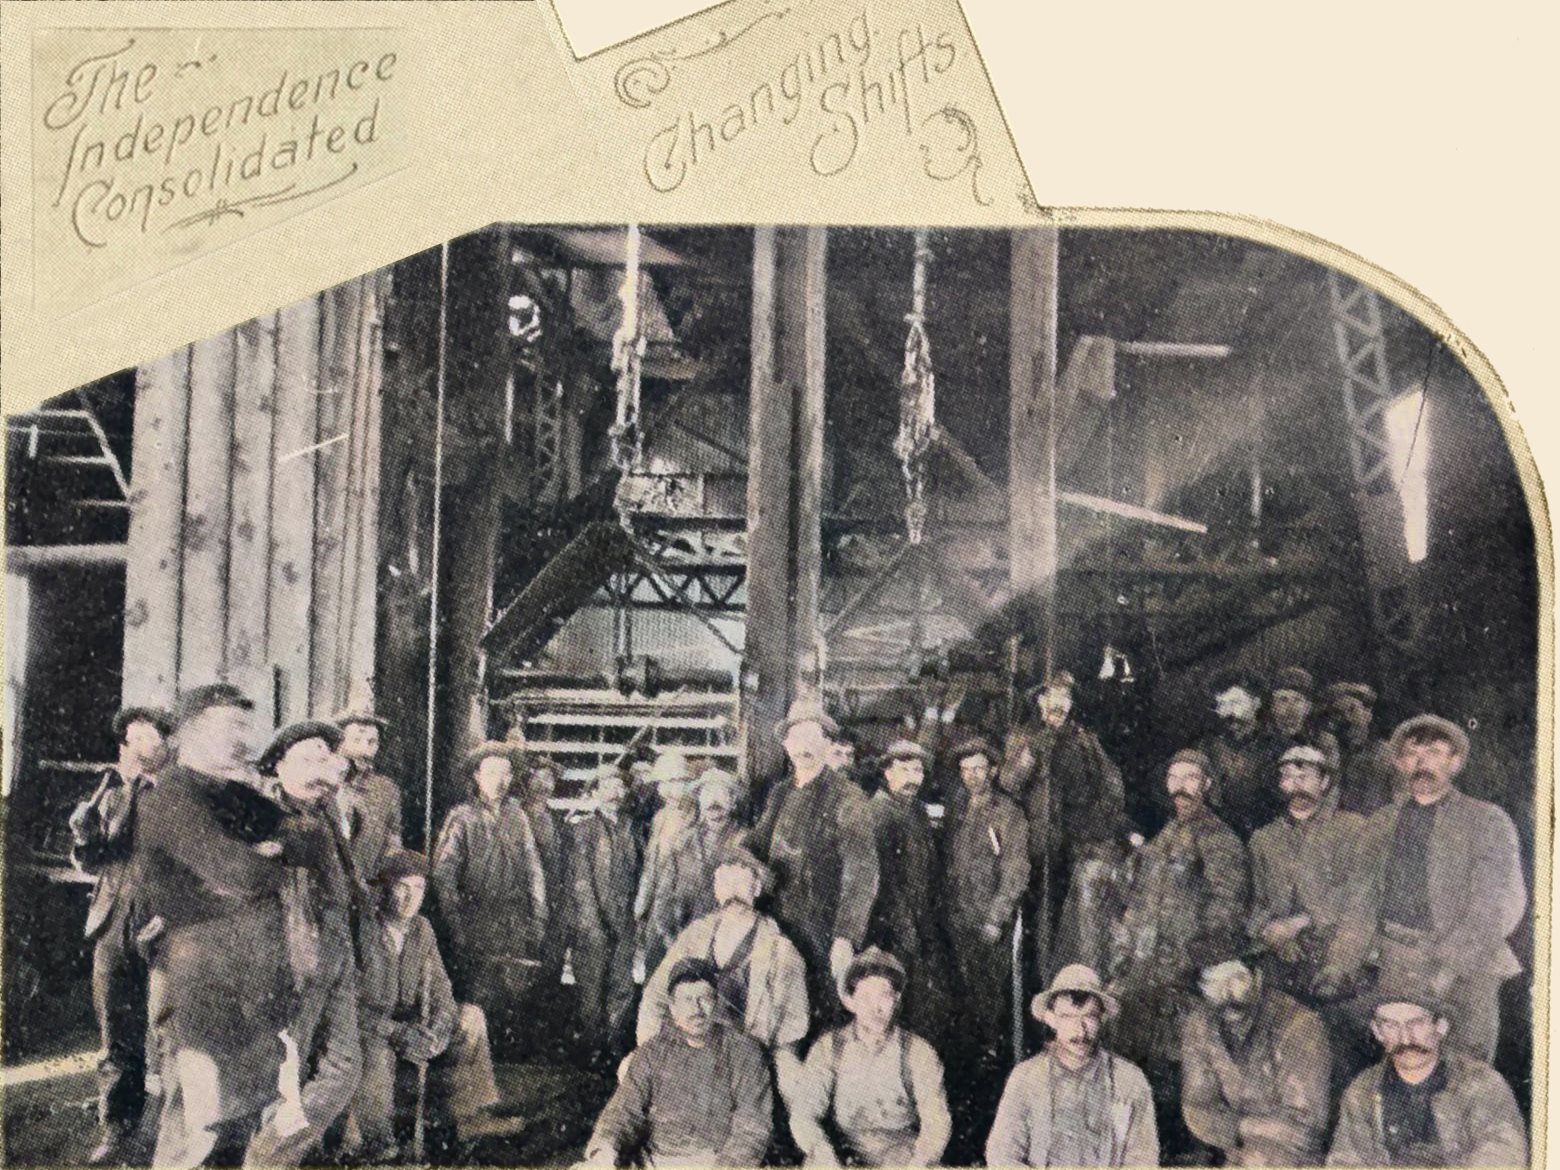 The Independence Consolidated Changing Shifts at Hull City Shaft